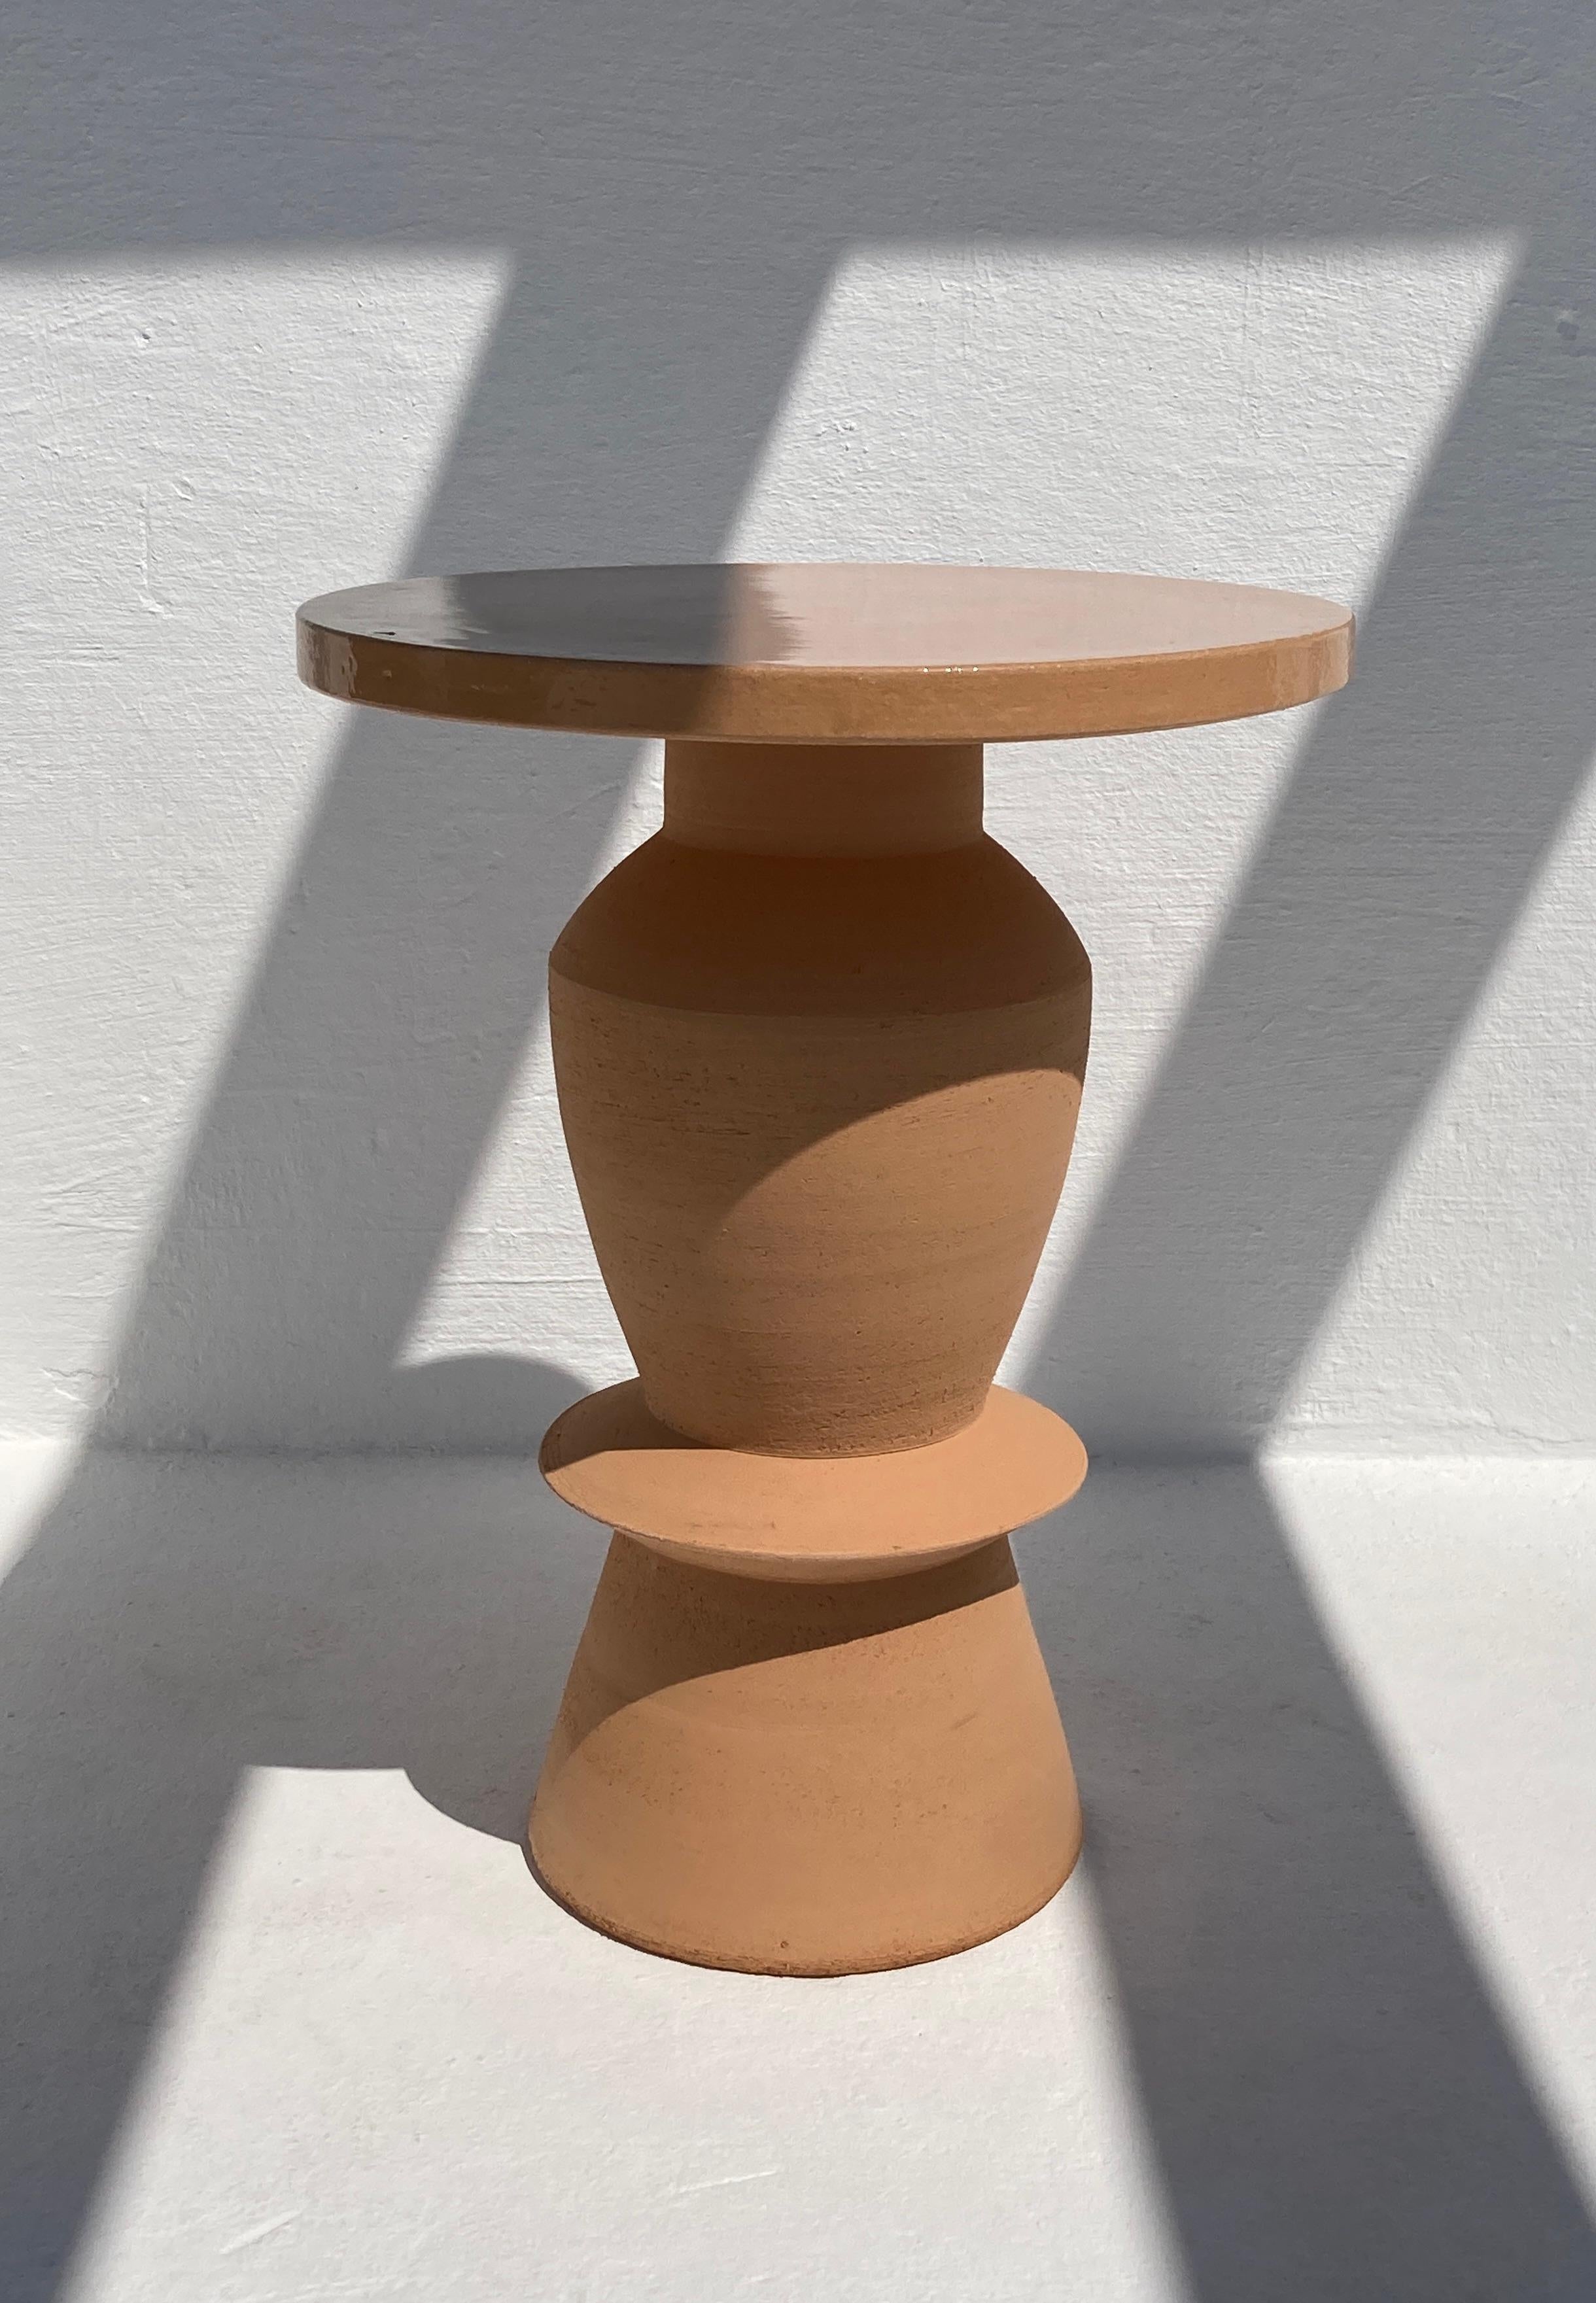 Terracotta union side table by Lea Ginac
Unique Piece. 
Dimensions: Diameter 40 x H 47 cm 
Materials: Terracotta Chamotte Clay. Handmade Ceramic. 
Technique: Hand-modeling.
Available in three other designs. Also available in White. 


This